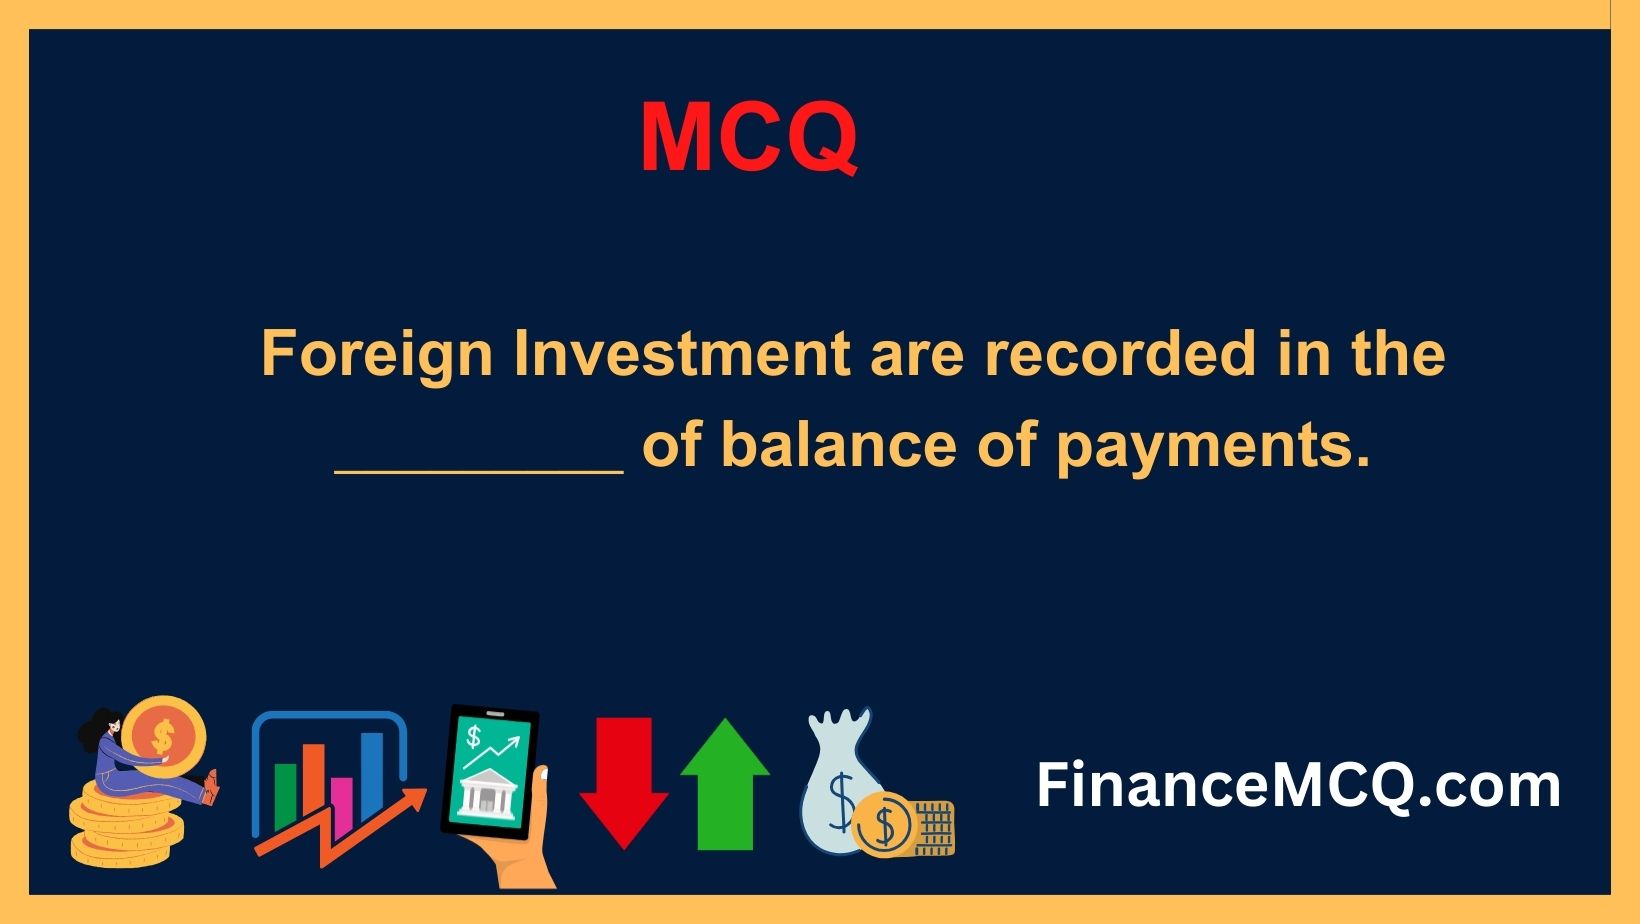 Foreign Investment are recorded in the _________ of balance of payments.